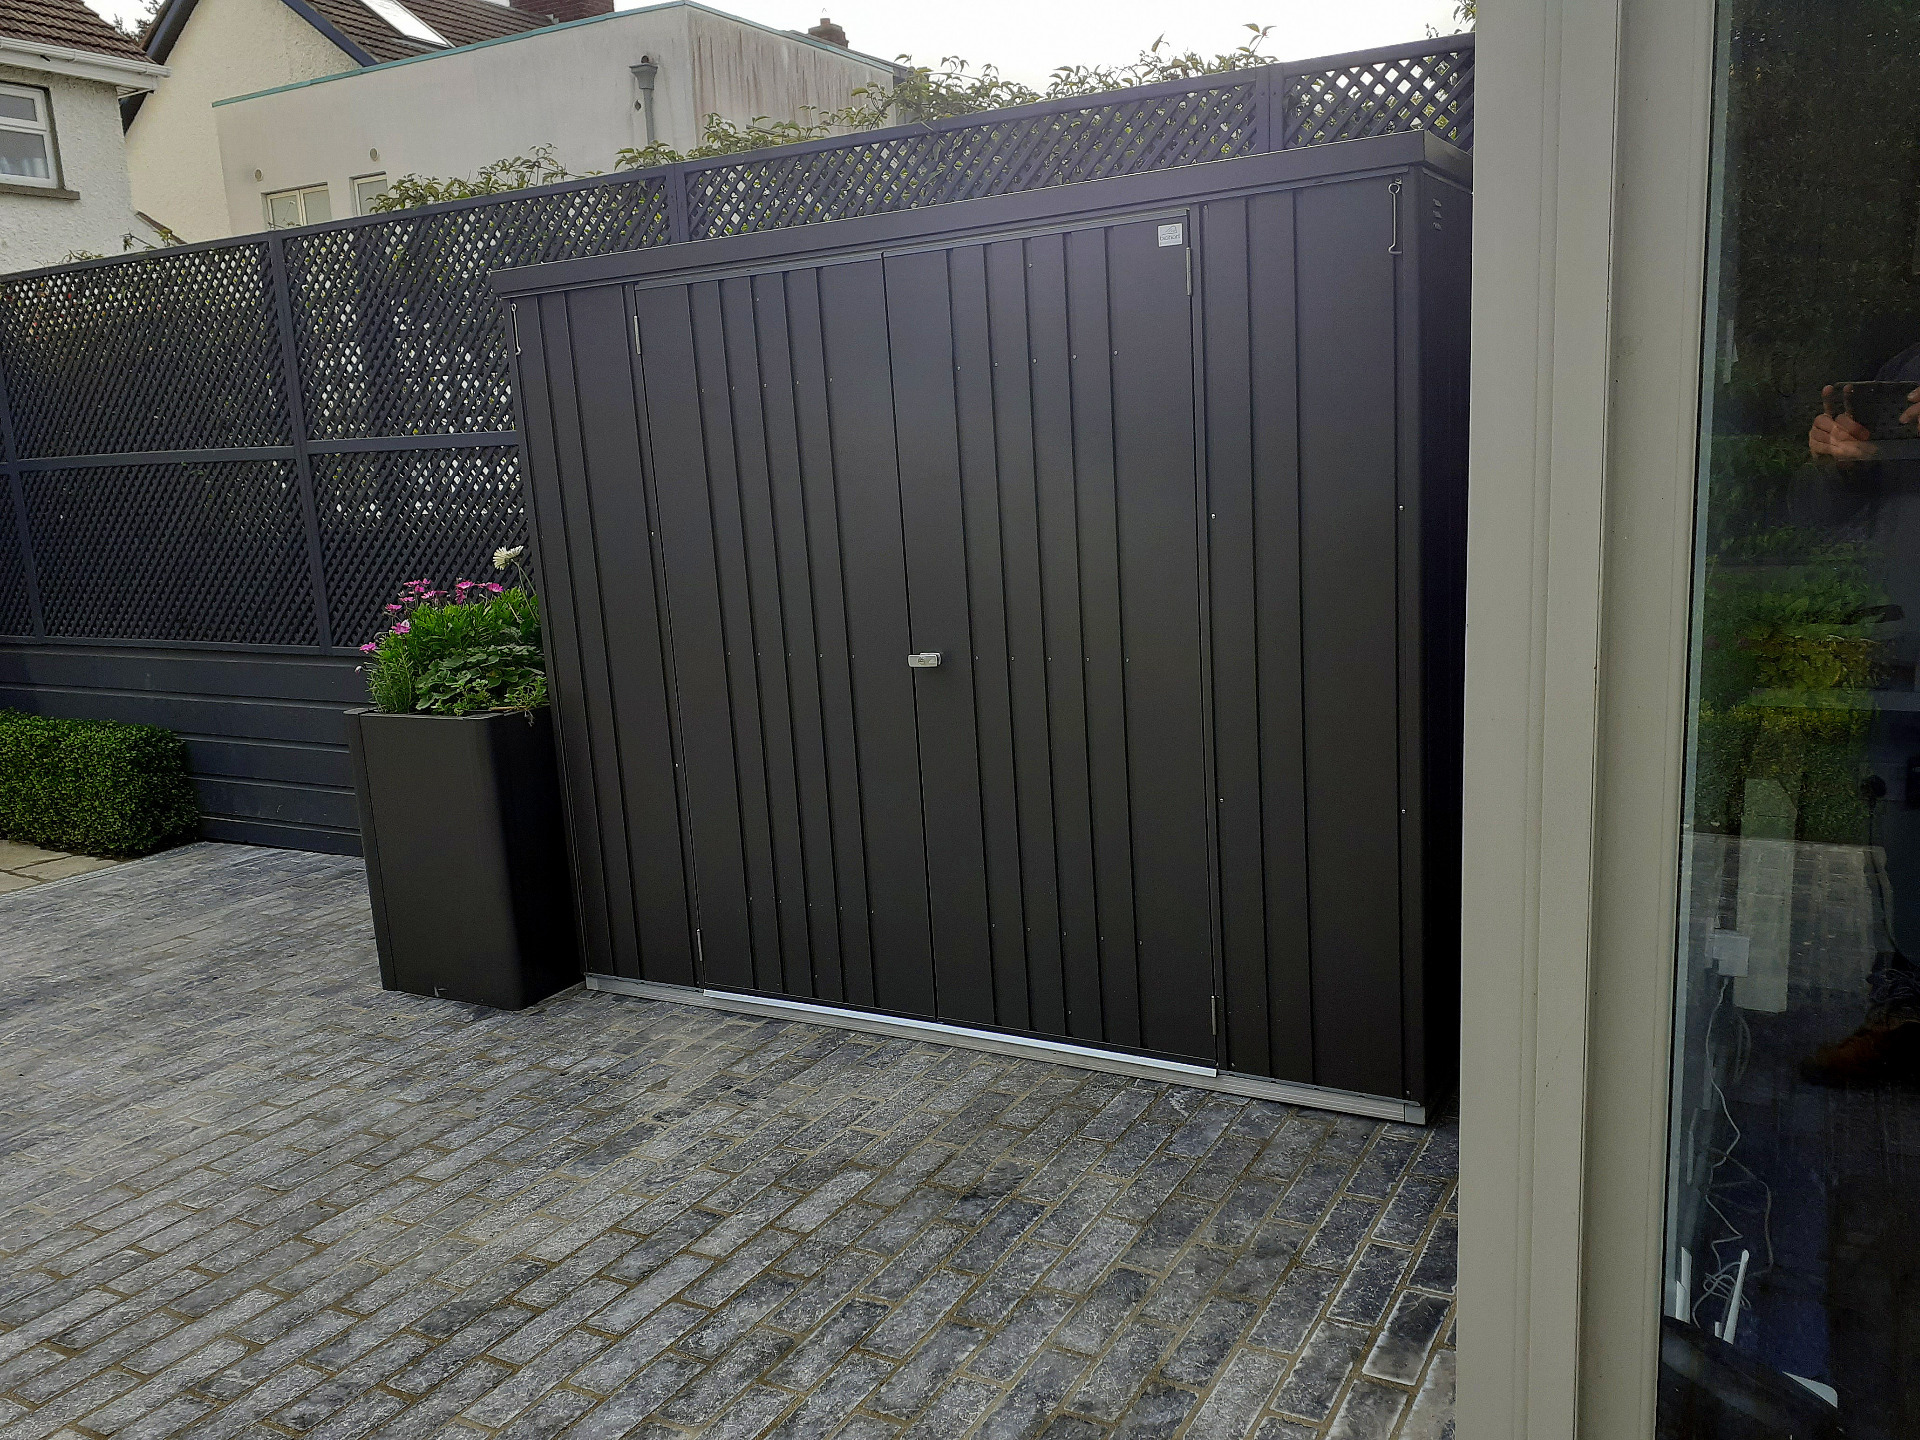 Garden Design & Landscaping in Terenure including custom made Garden Fencing, Biohort Steel Planters, Blue Limestone paving, Biohort Garden Shed,  Artificial Grass - durable finishes, low maintenance, trouble free performance